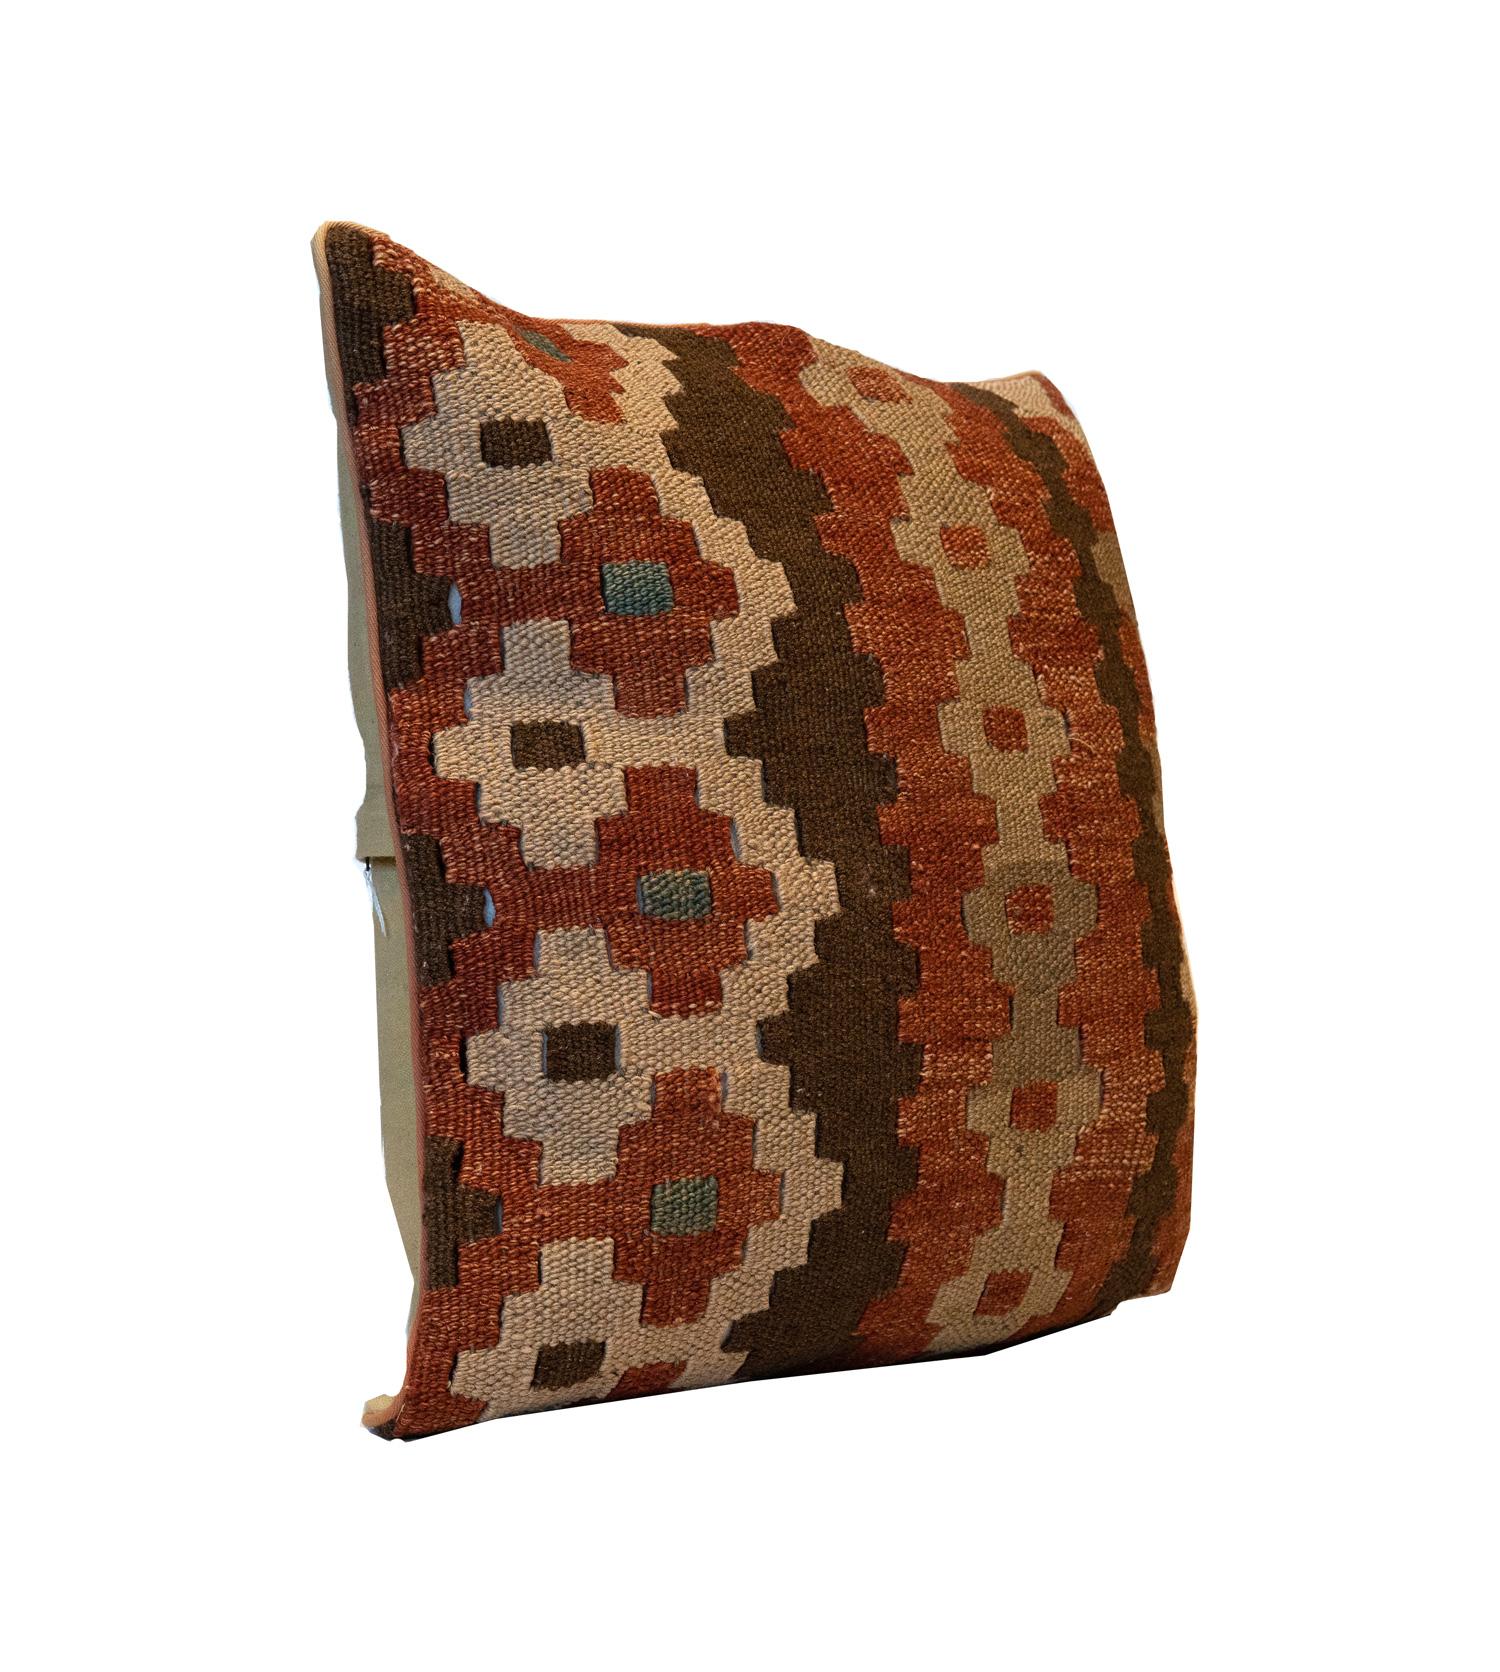 Antique vintage pillow case zipper cushion handmade Turkish Kilim pillow cover, view one of the most comprehensive collections of decorative pillow, handmade traditional Kilim rugs, Kilim cushions cover and Kilim Furniture, with worldwide delivery.